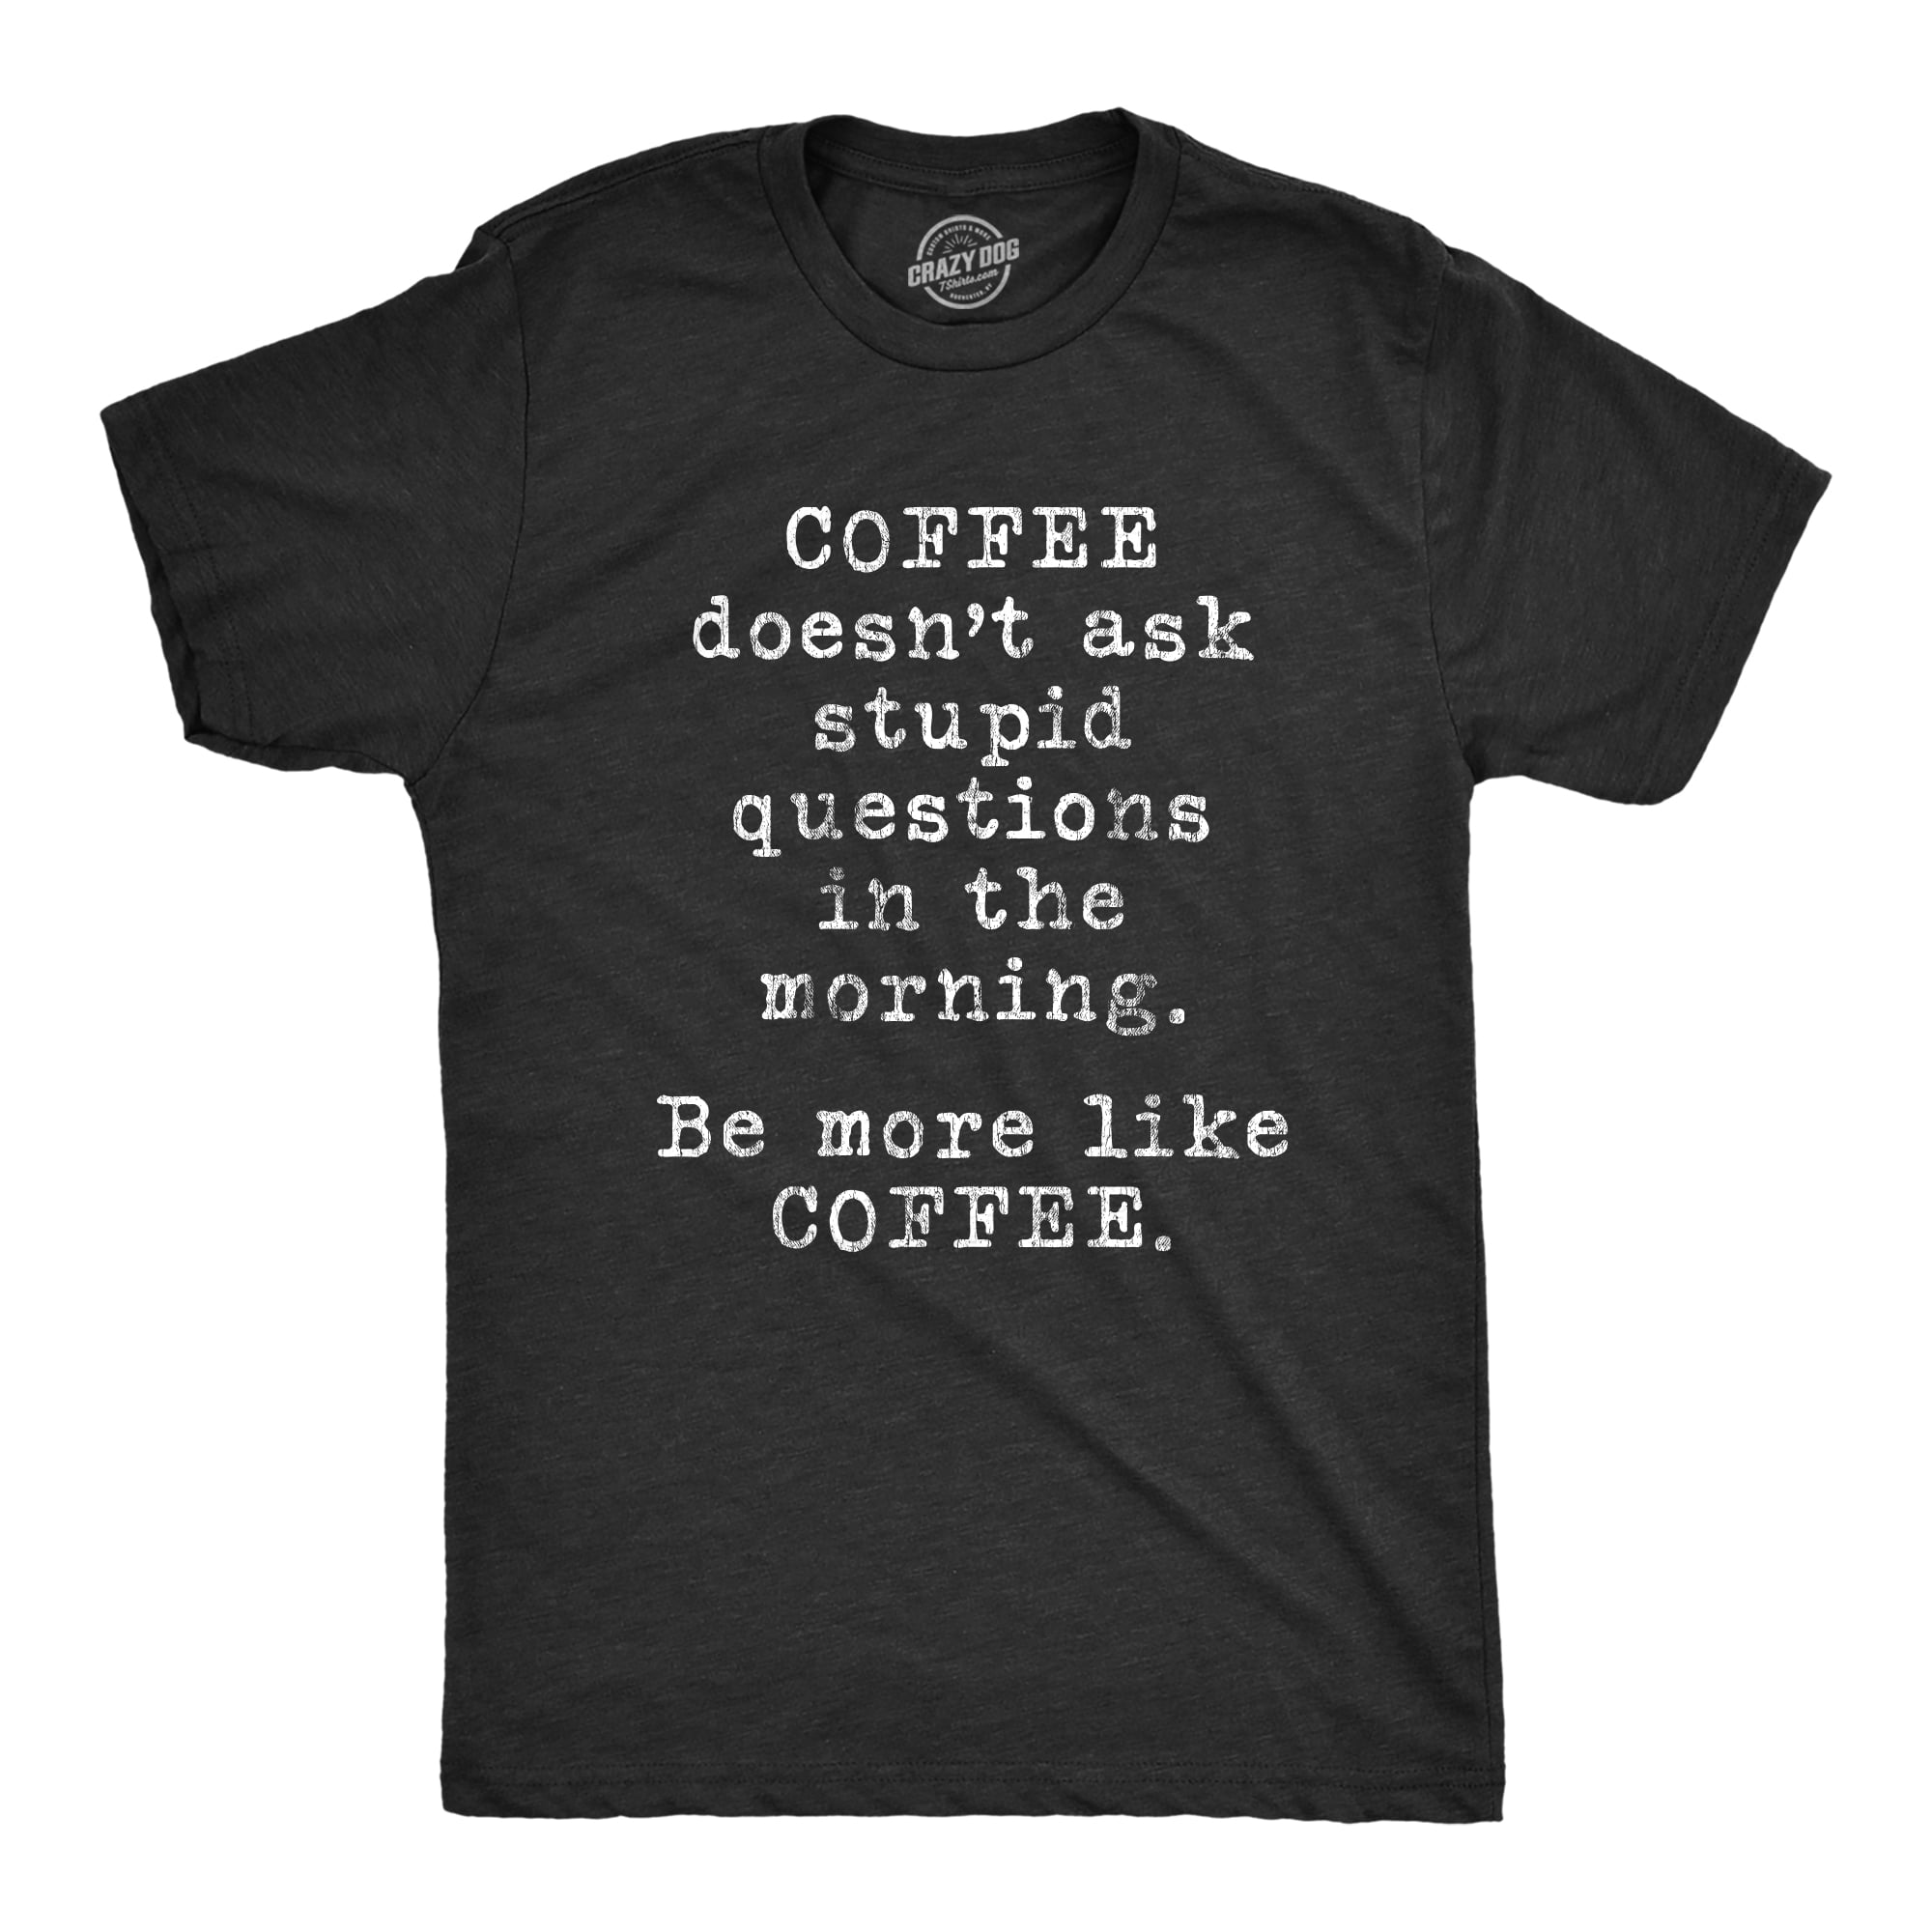 Birthday tee Novelty T-SHIRT Funny T Shirt Coffe Doesnt Ask Silly Questions